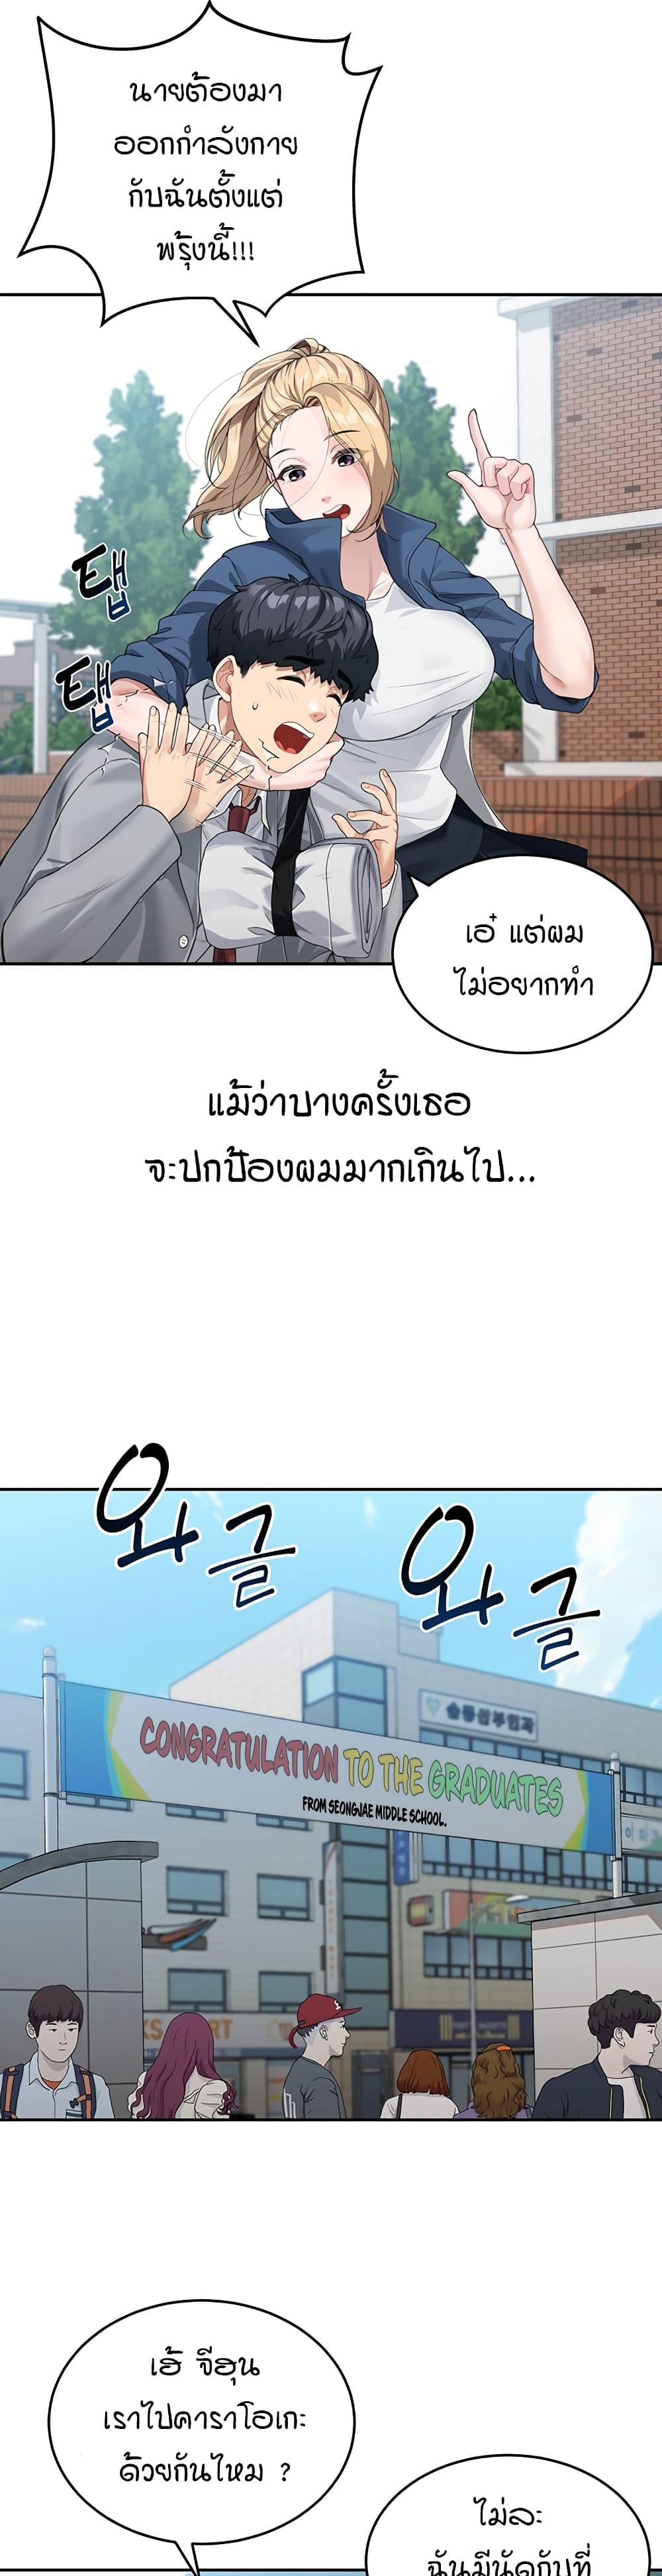 Is It Your Mother or Sister? ตอนที่ 1 ภาพ 17